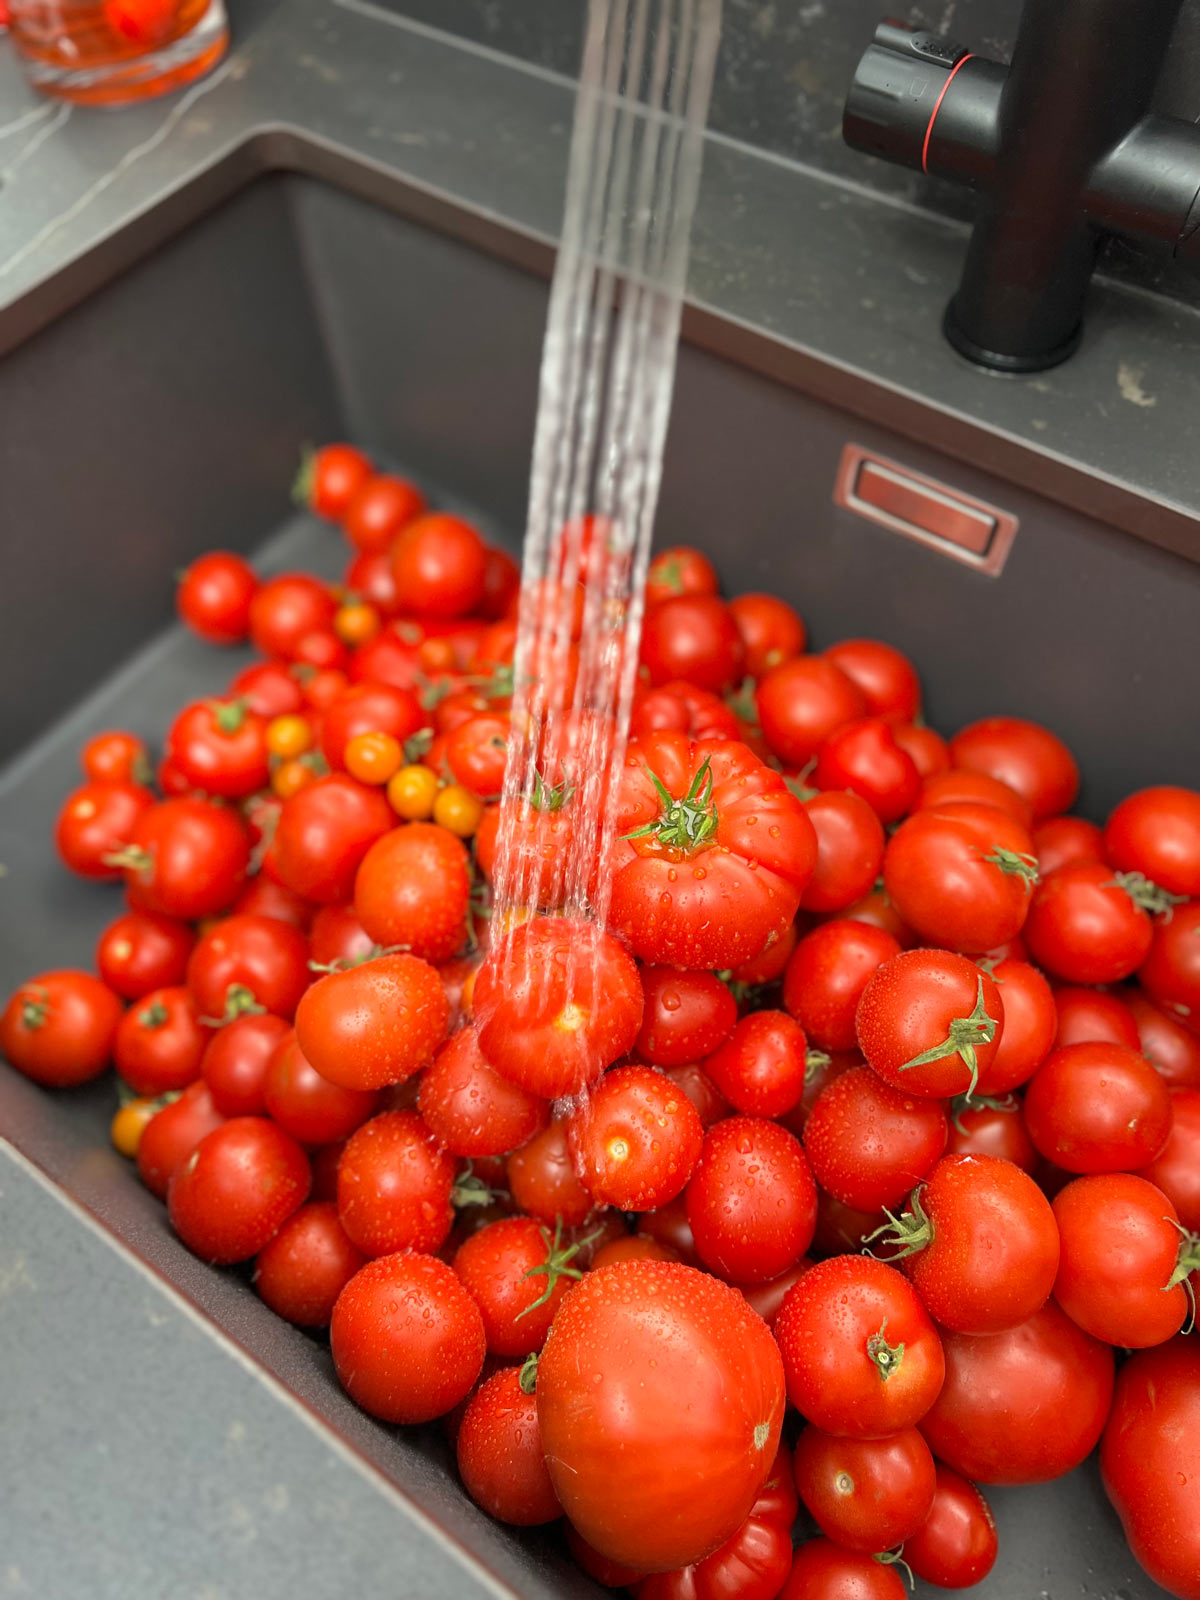 Lots of tomatoes in a sink getting washed.